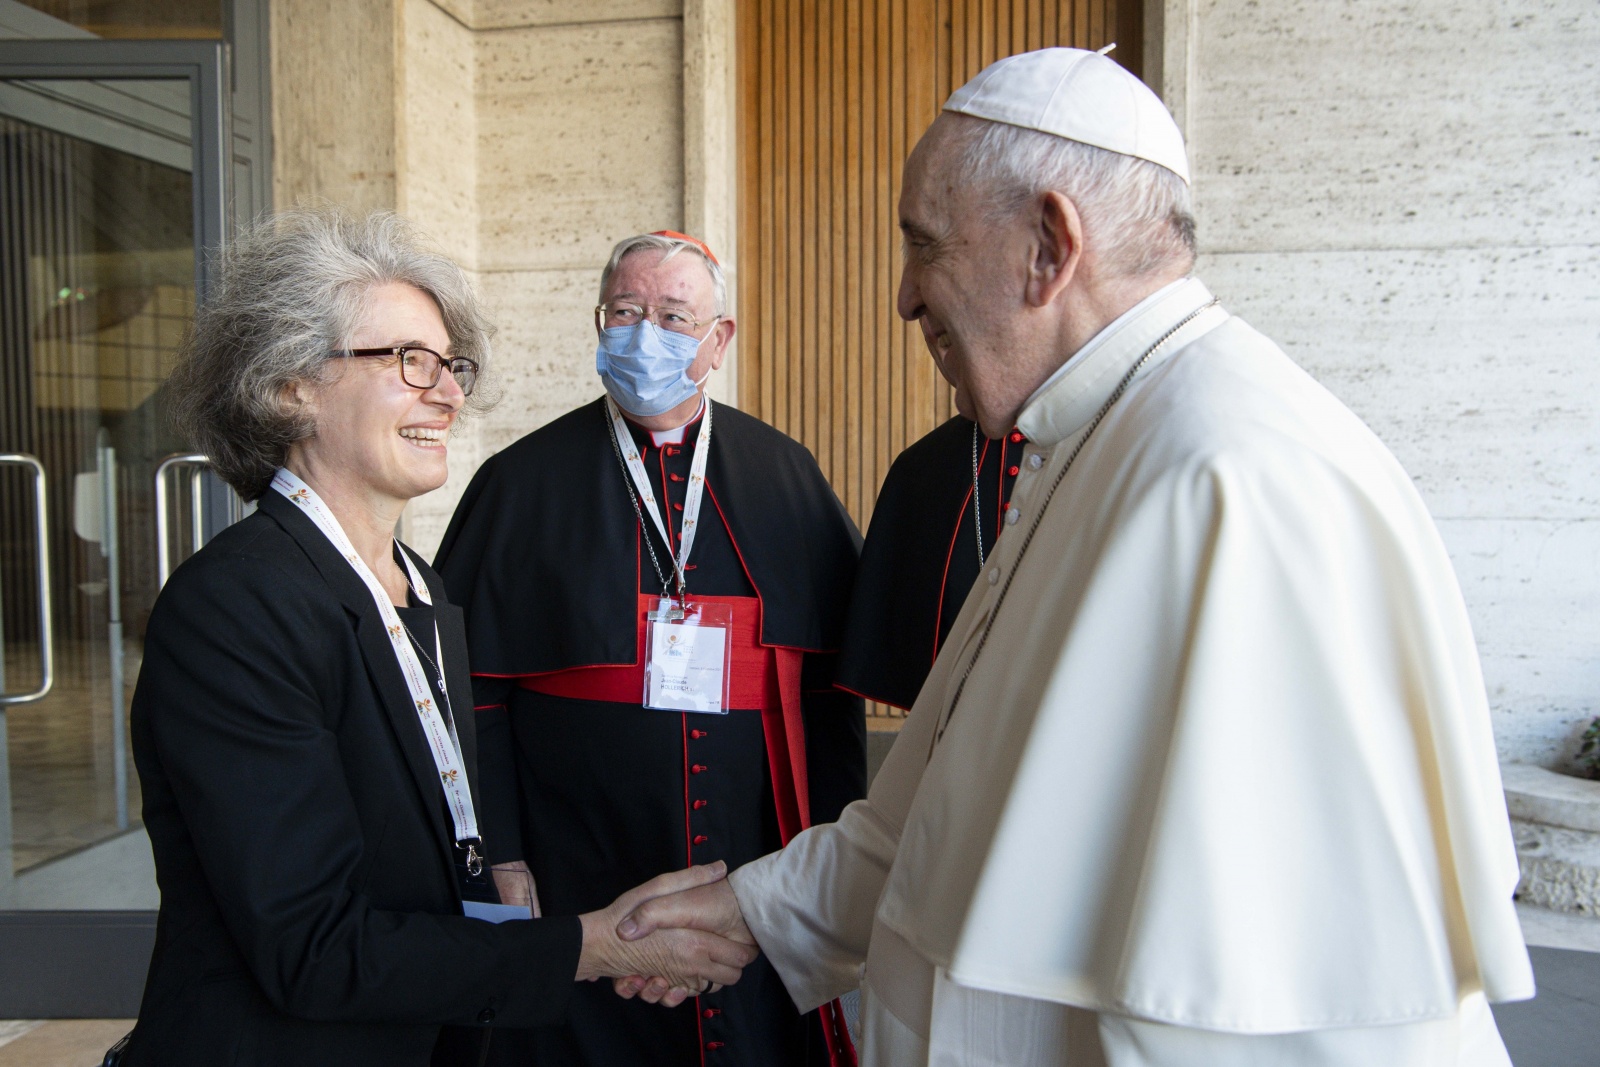 Testimonies give insight into how Synod on Synodality can realize